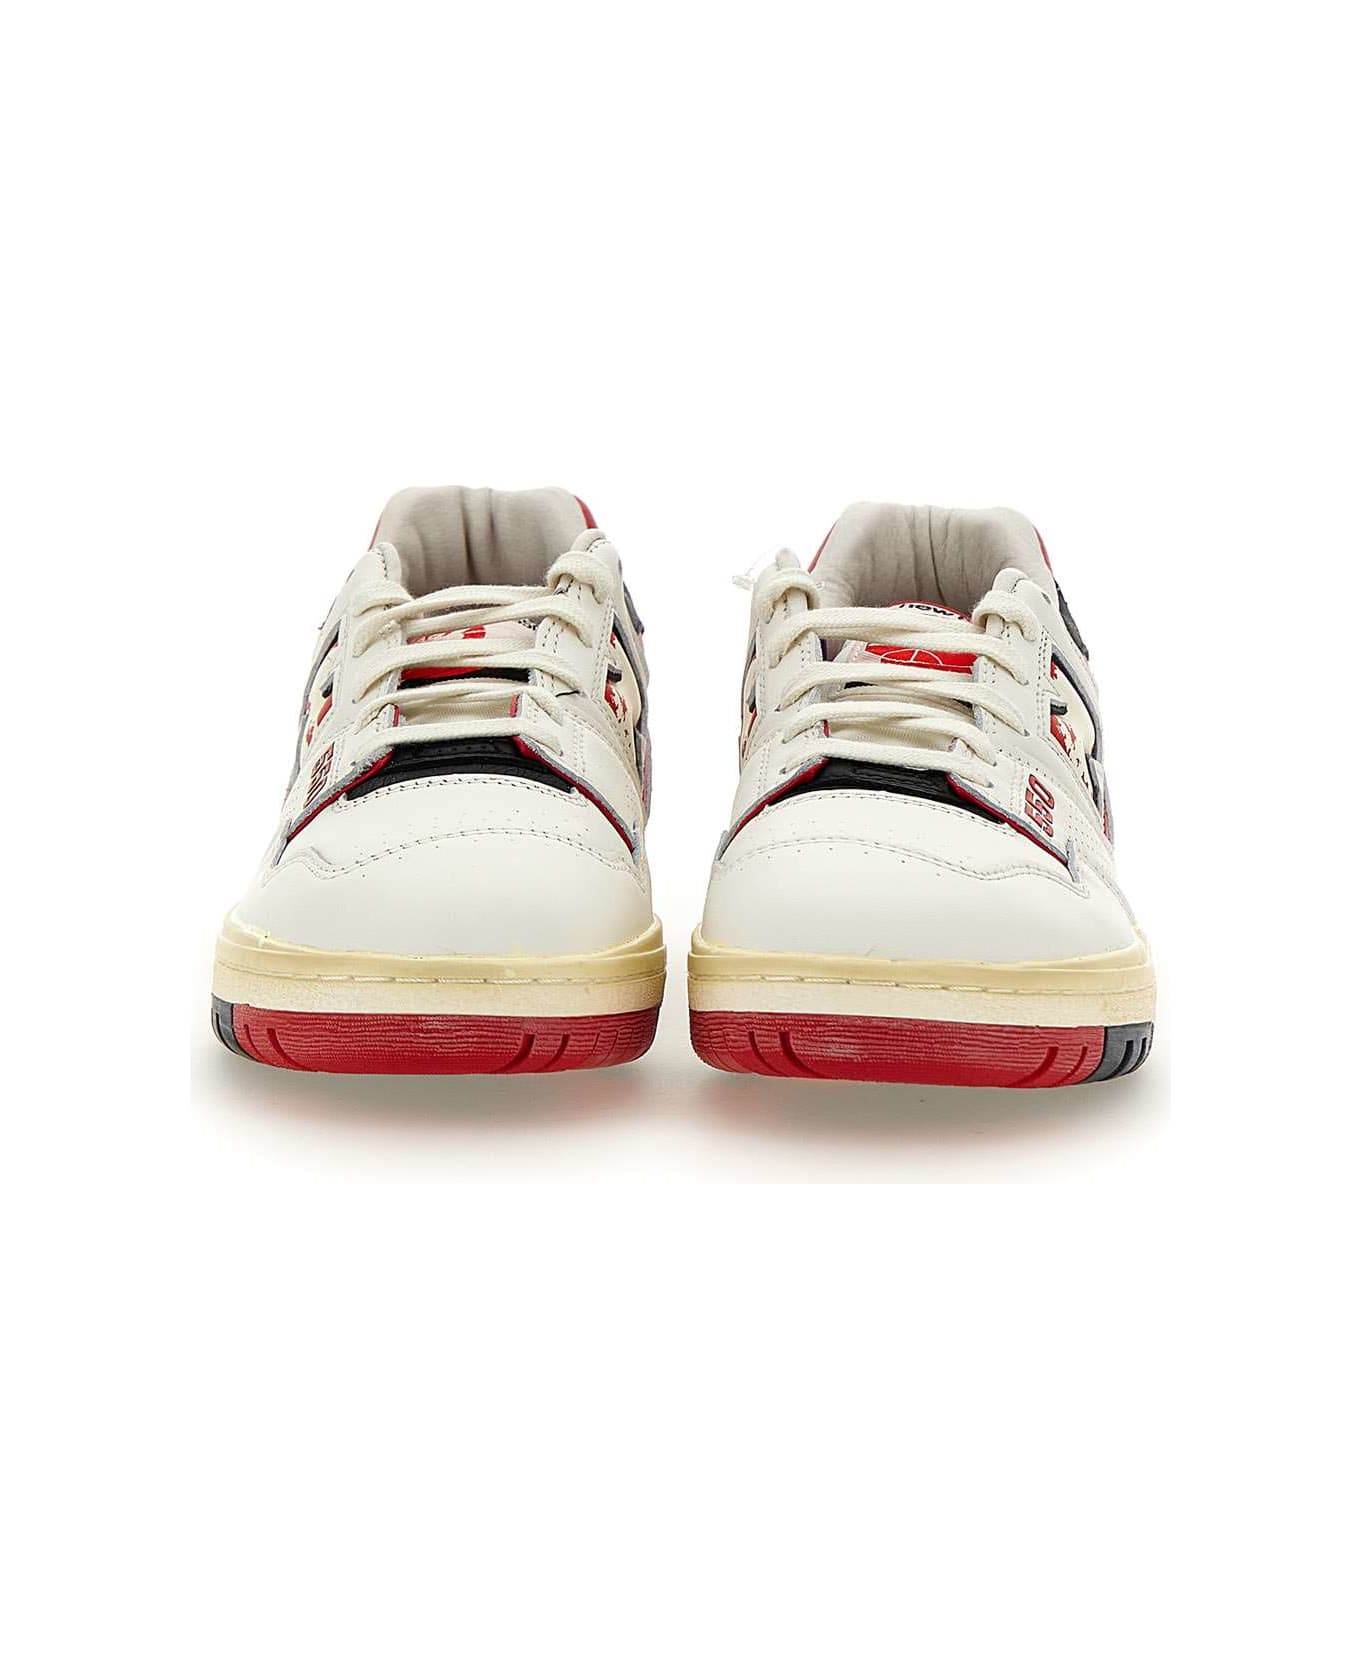 New Balance "bb550vga" Leather Sneakers - WHITE-red